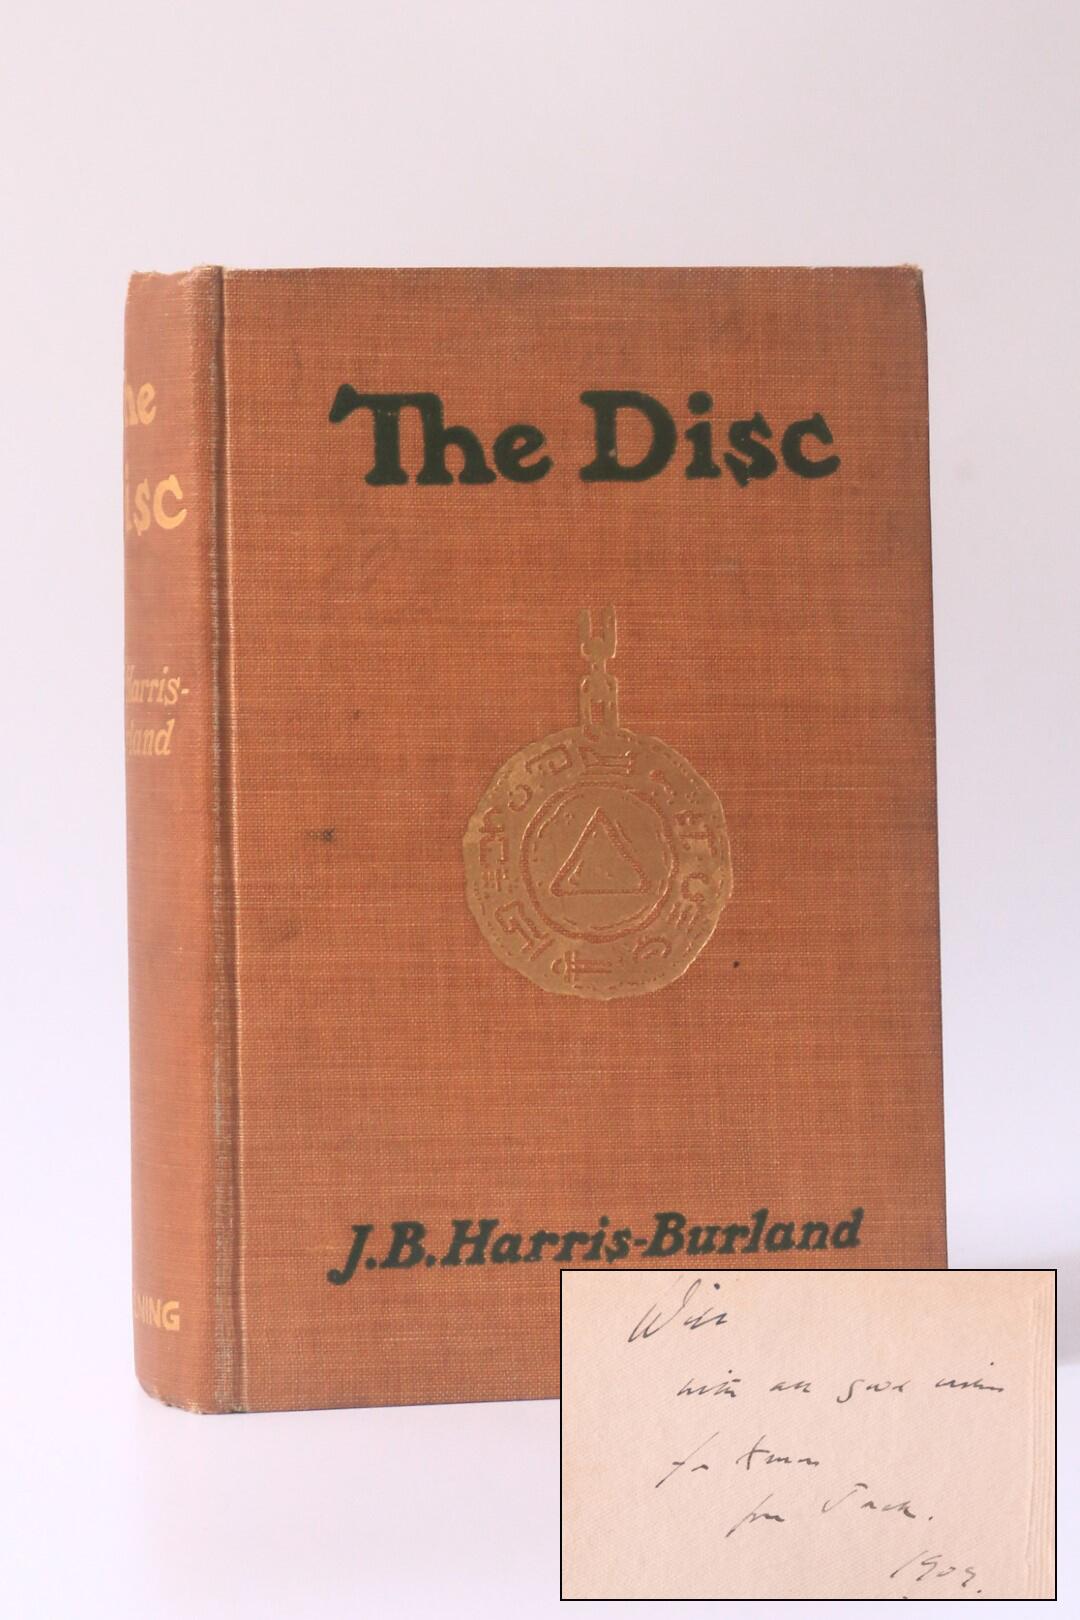 J.B. Harris-Burland - The Disc - Greening & Co., 1909, Signed First Edition.